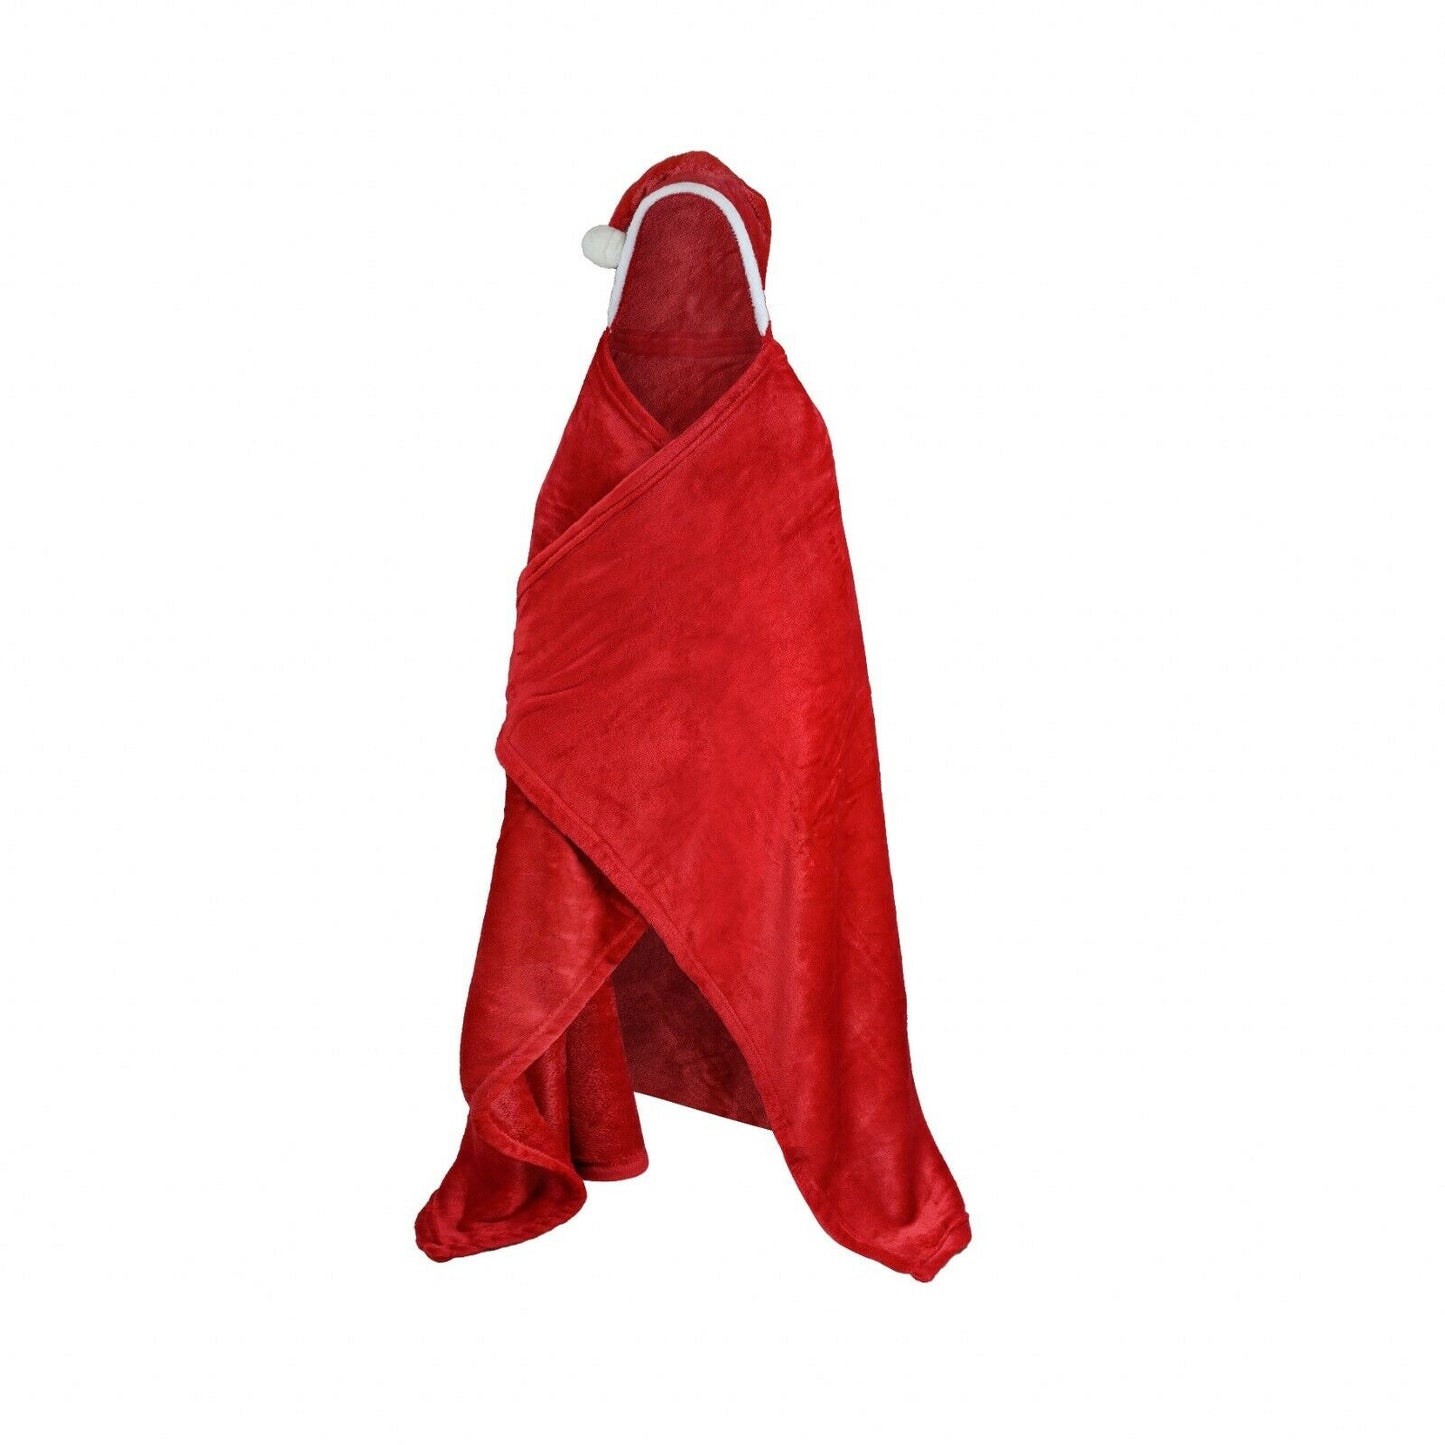 Children's Santa Novelty Hooded Fleece Blanket, These Are Super Soft And Perfect For The Festive Season As  A Gifts, They Measure 110cm x140cm, 100% Polyester (Excludes Trimming)